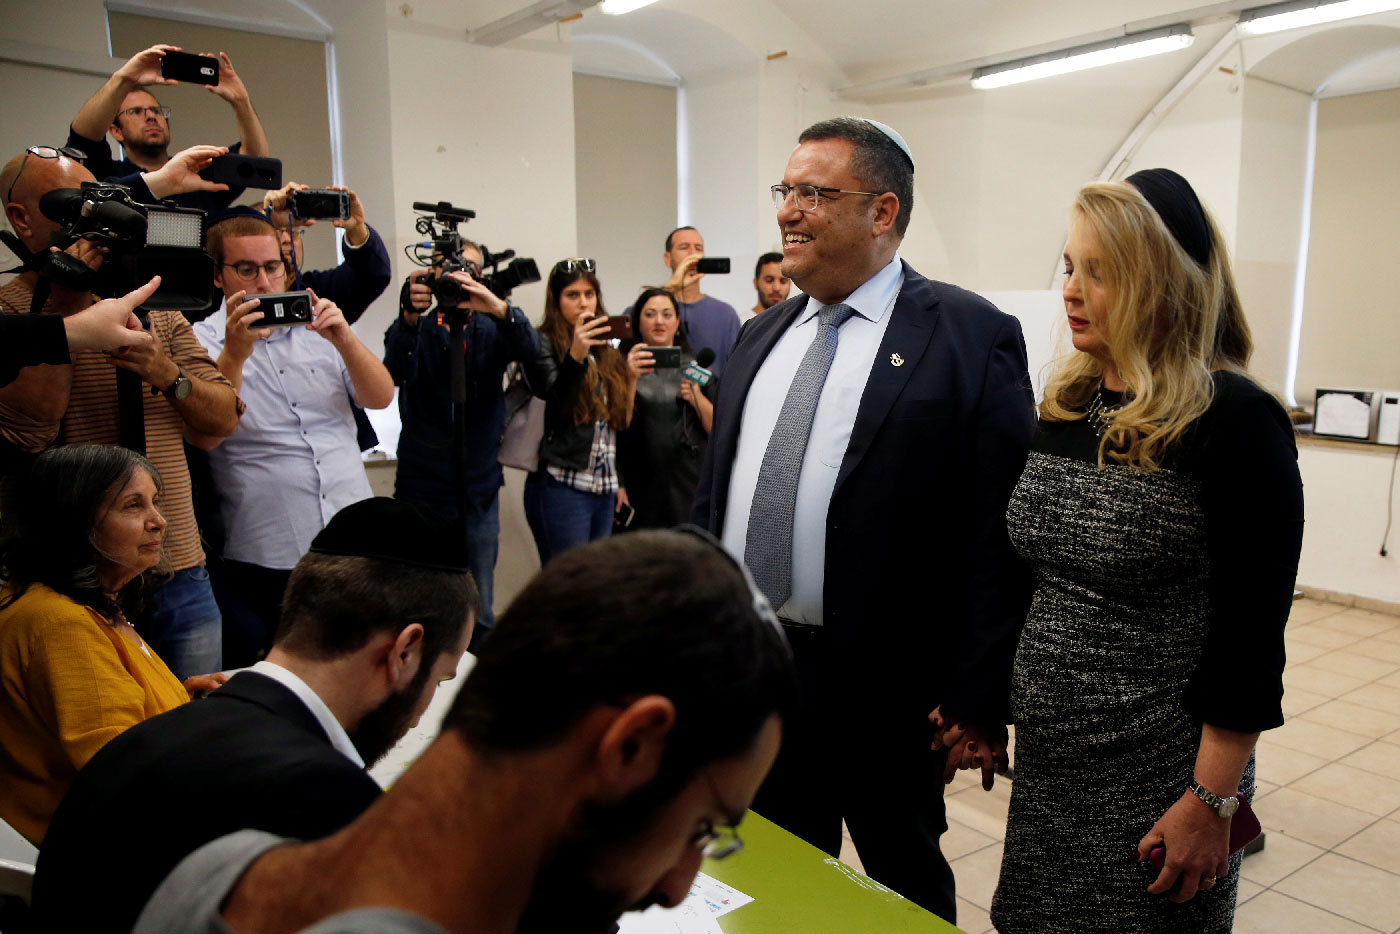 Jerusalem mayoral candidate Moshe Lion and his wife arrive to cast their votes.